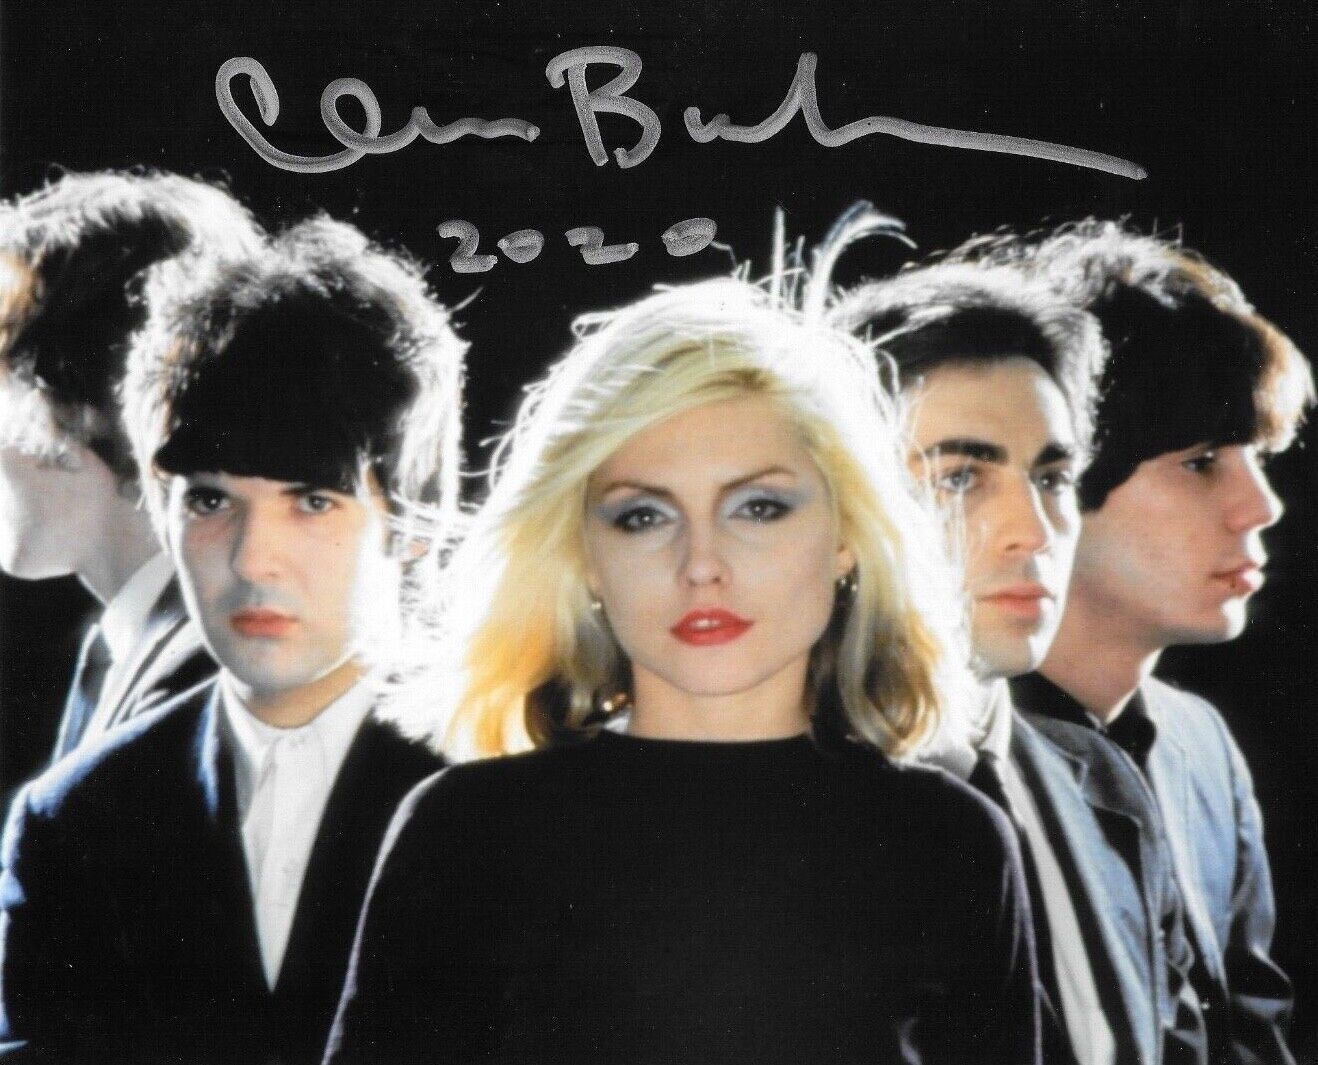 * CLEM BURKE * signed 8x10 Photo Poster painting * BLONDIE DRUMMER * COA * 6